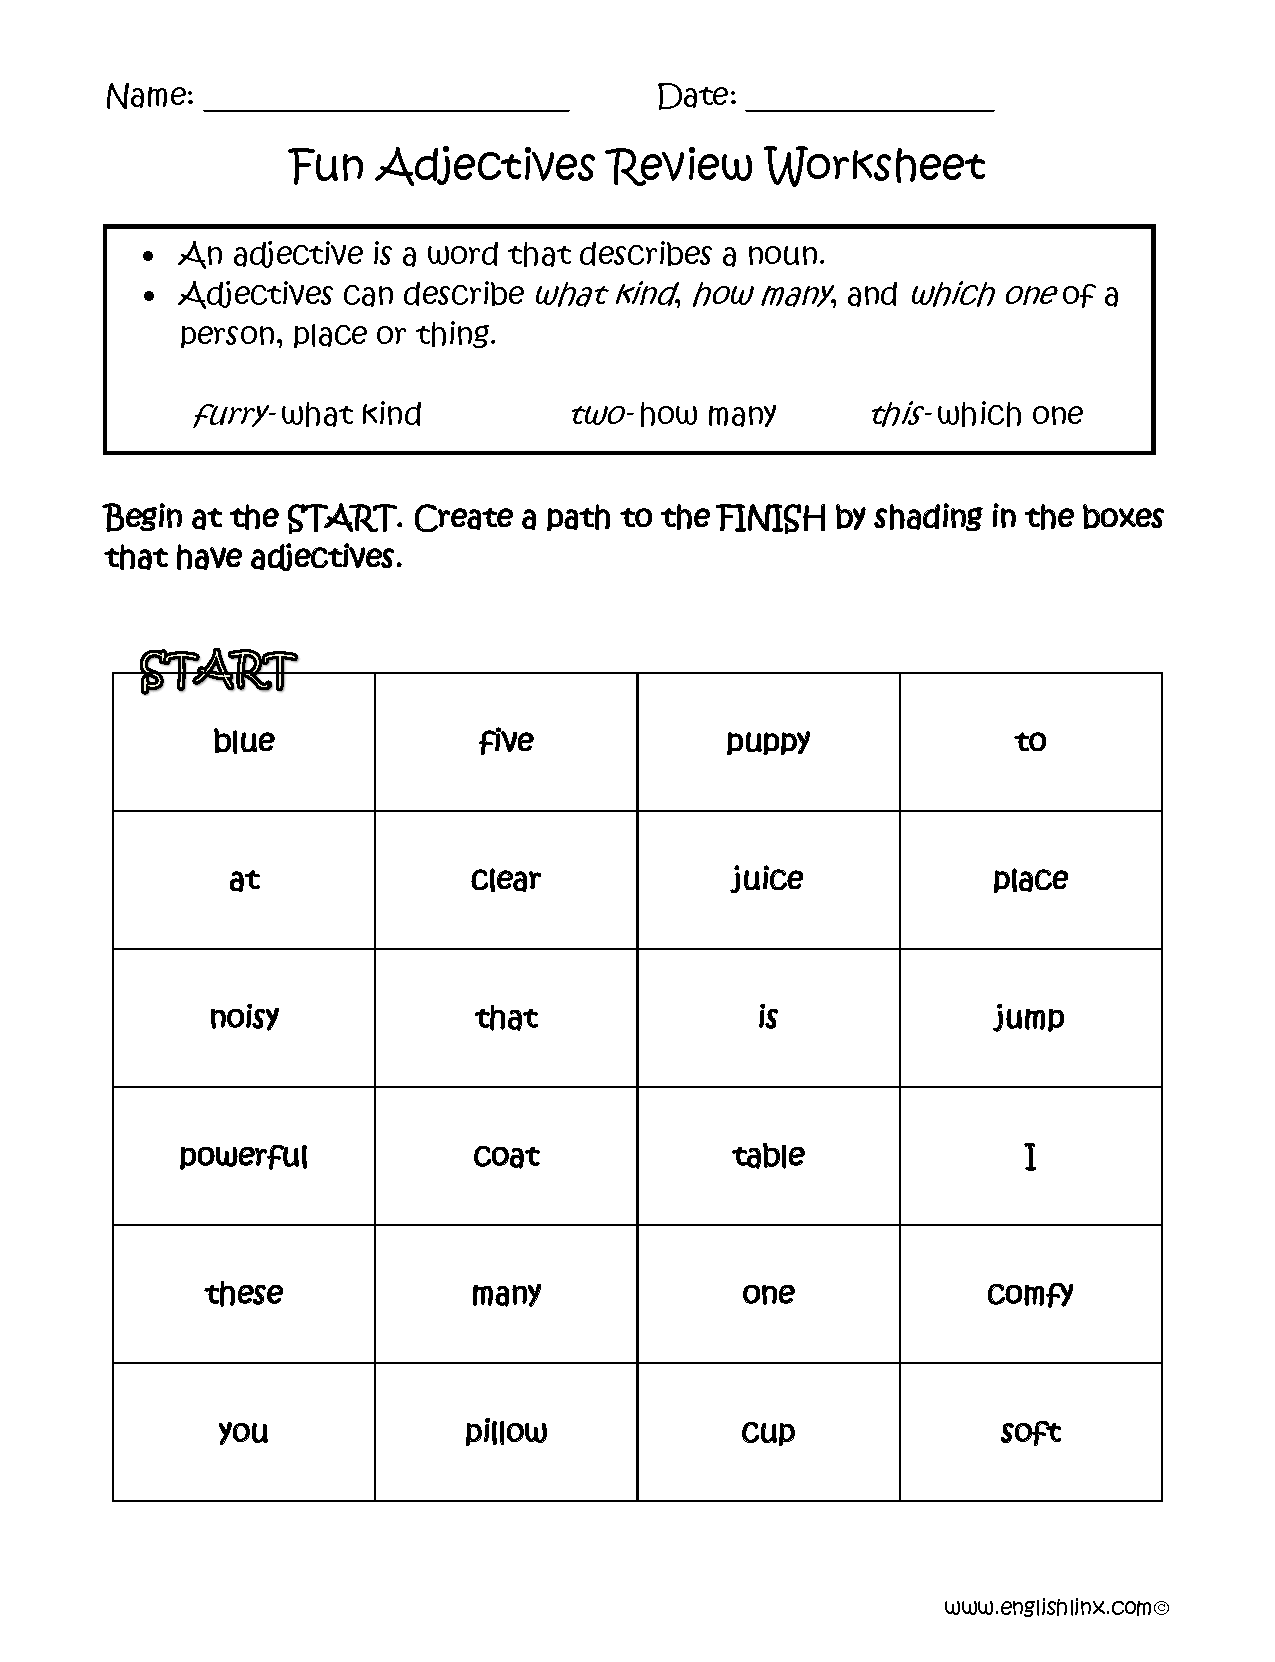 Fun Adjectives Review Worksheets